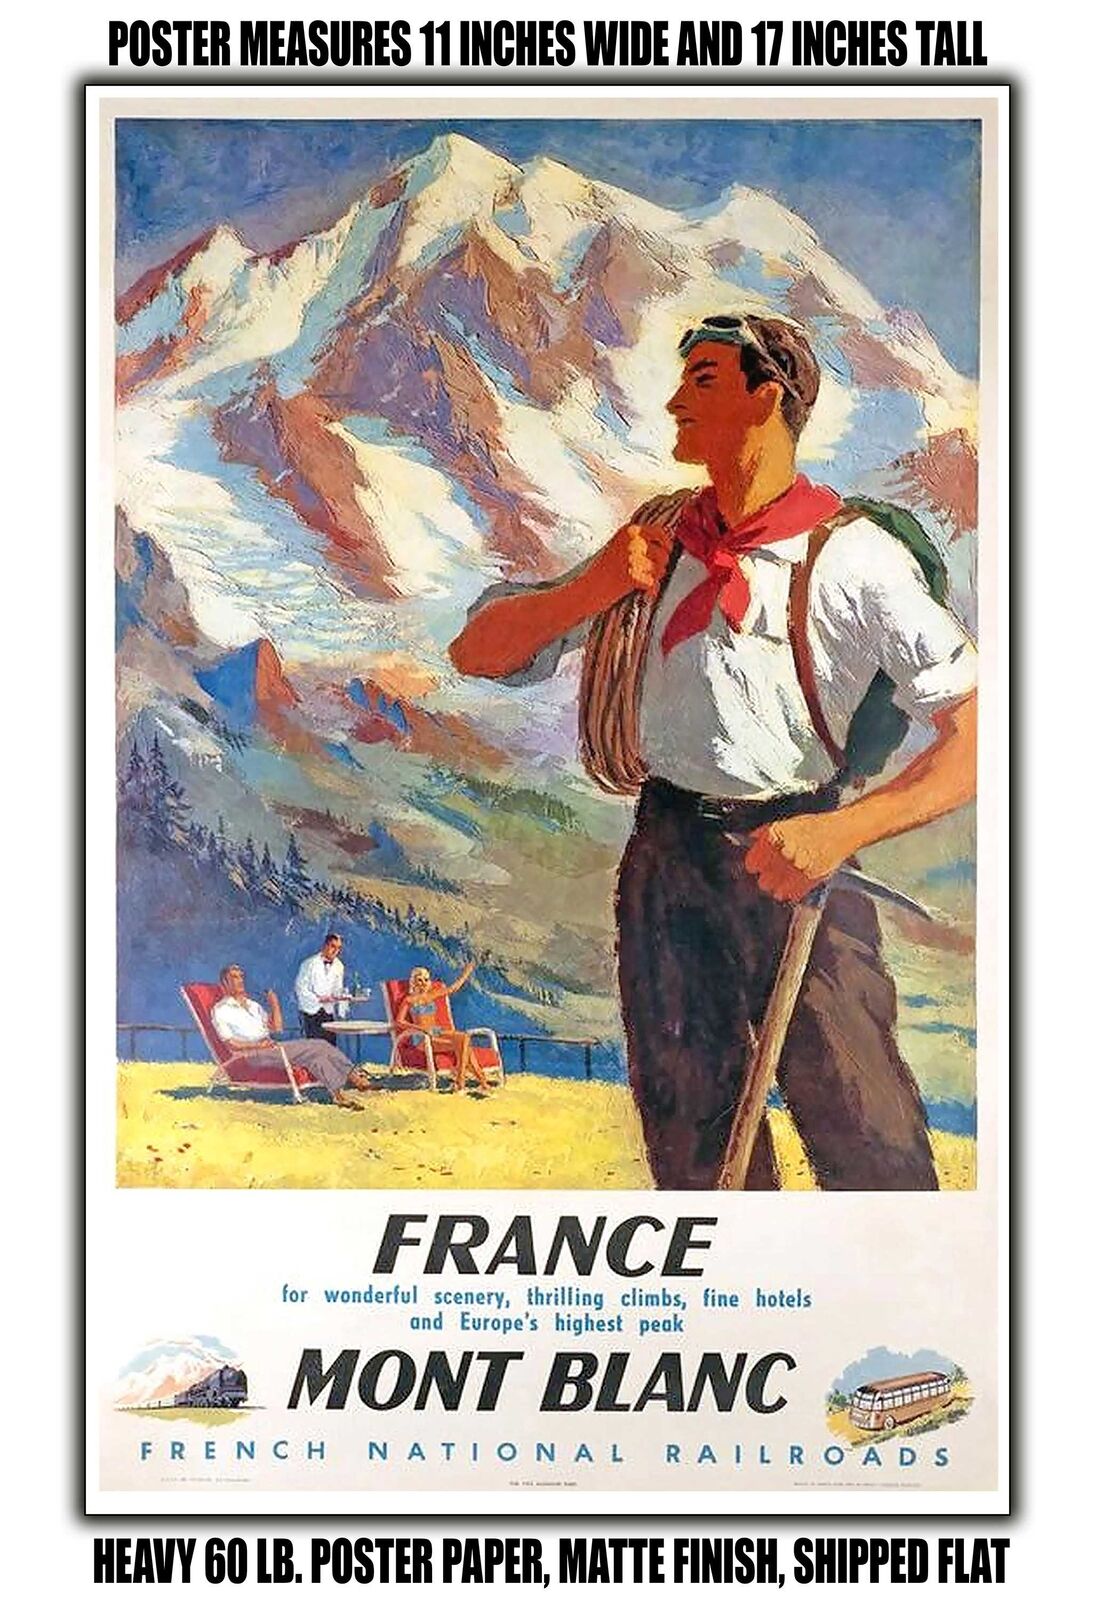 11x17 POSTER - 1948 France Mont Blanc French National Railroads